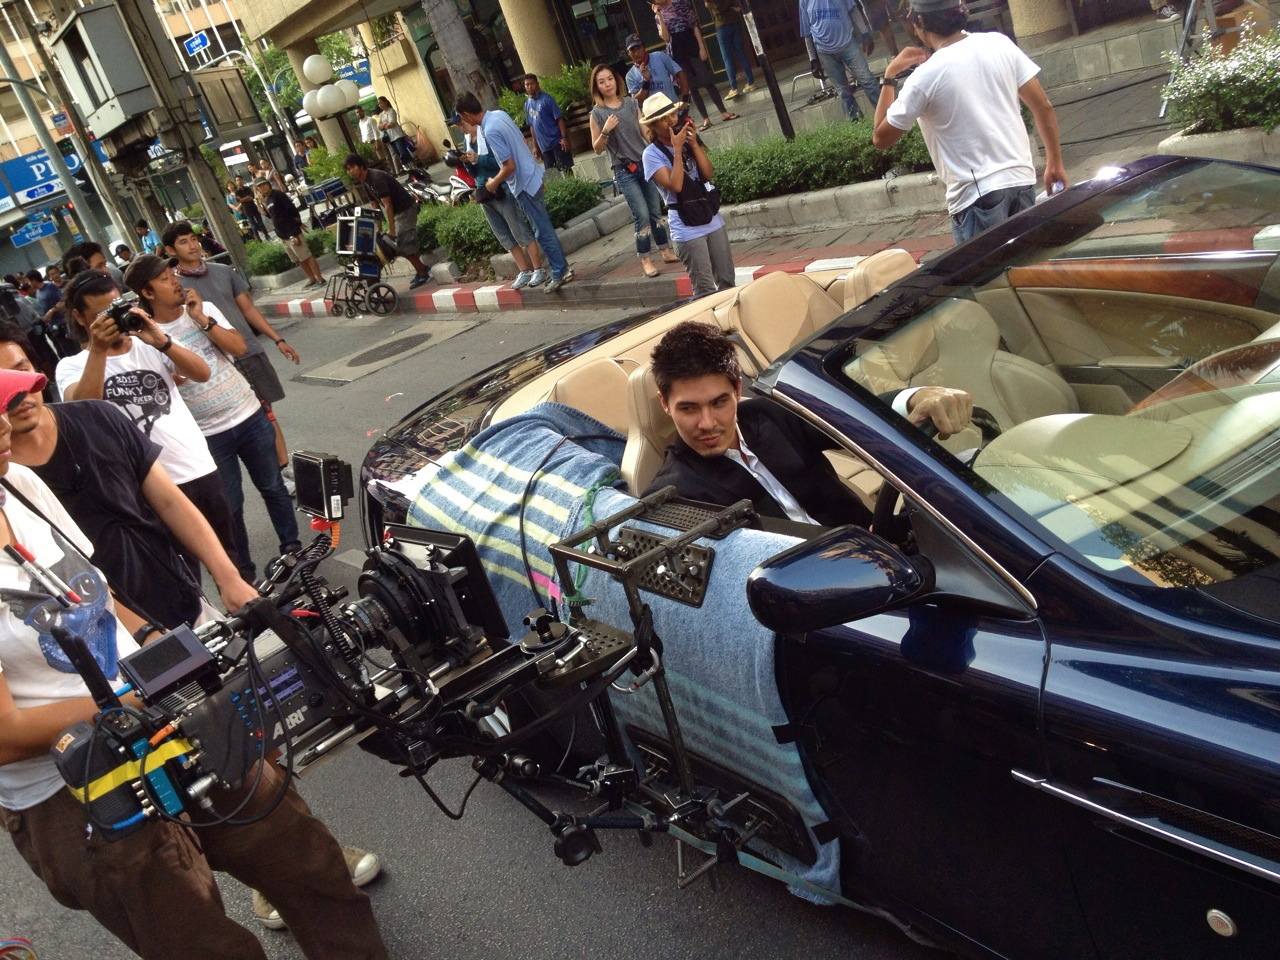 Lewis Tan on location in Thailand